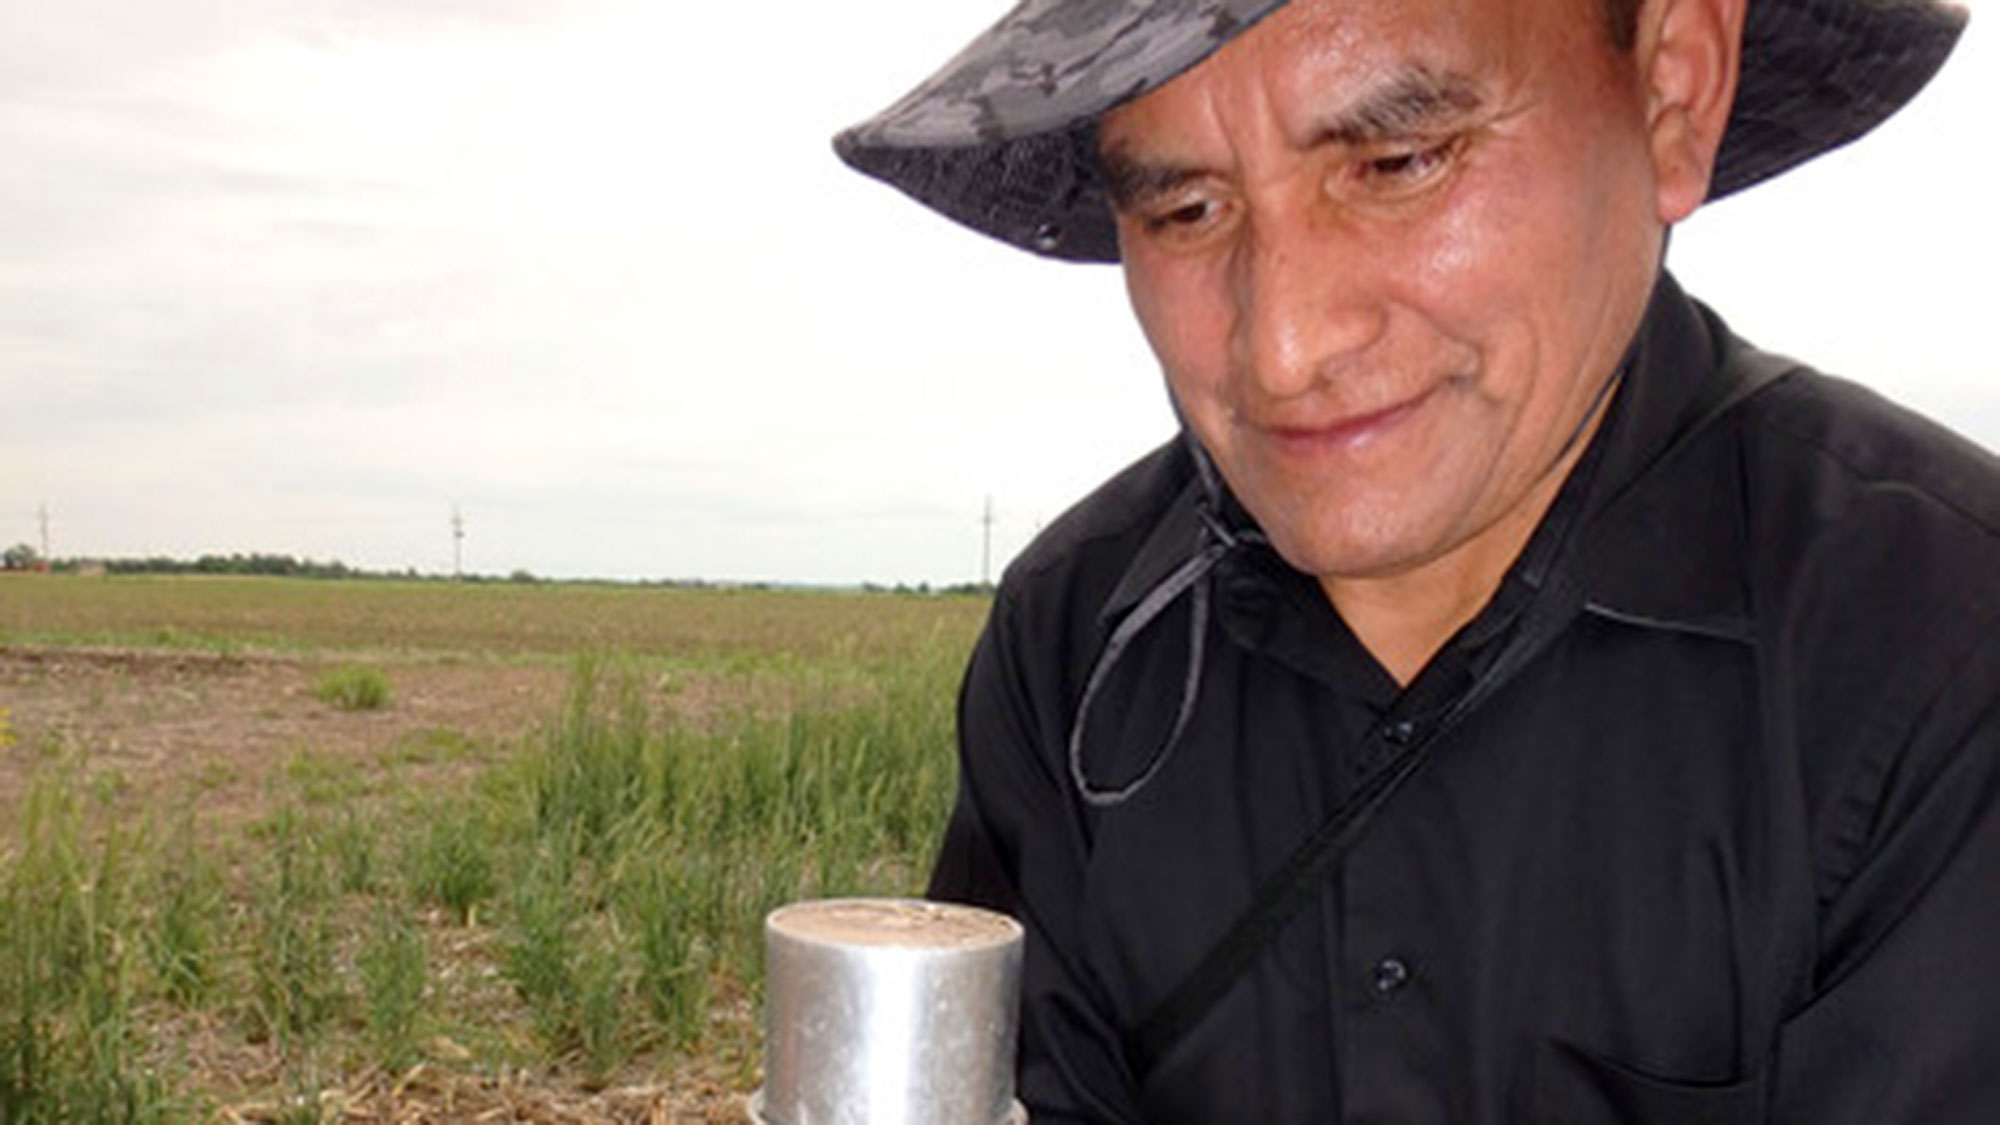 Nebraska soil scientist Humberto Blanco collects intact soil cores from fields with and without cover crops in eastern Nebraska to determine soil bulk density needed to compute soil C stocks on an equivalent mass basis. Blanco is the author of a new book 